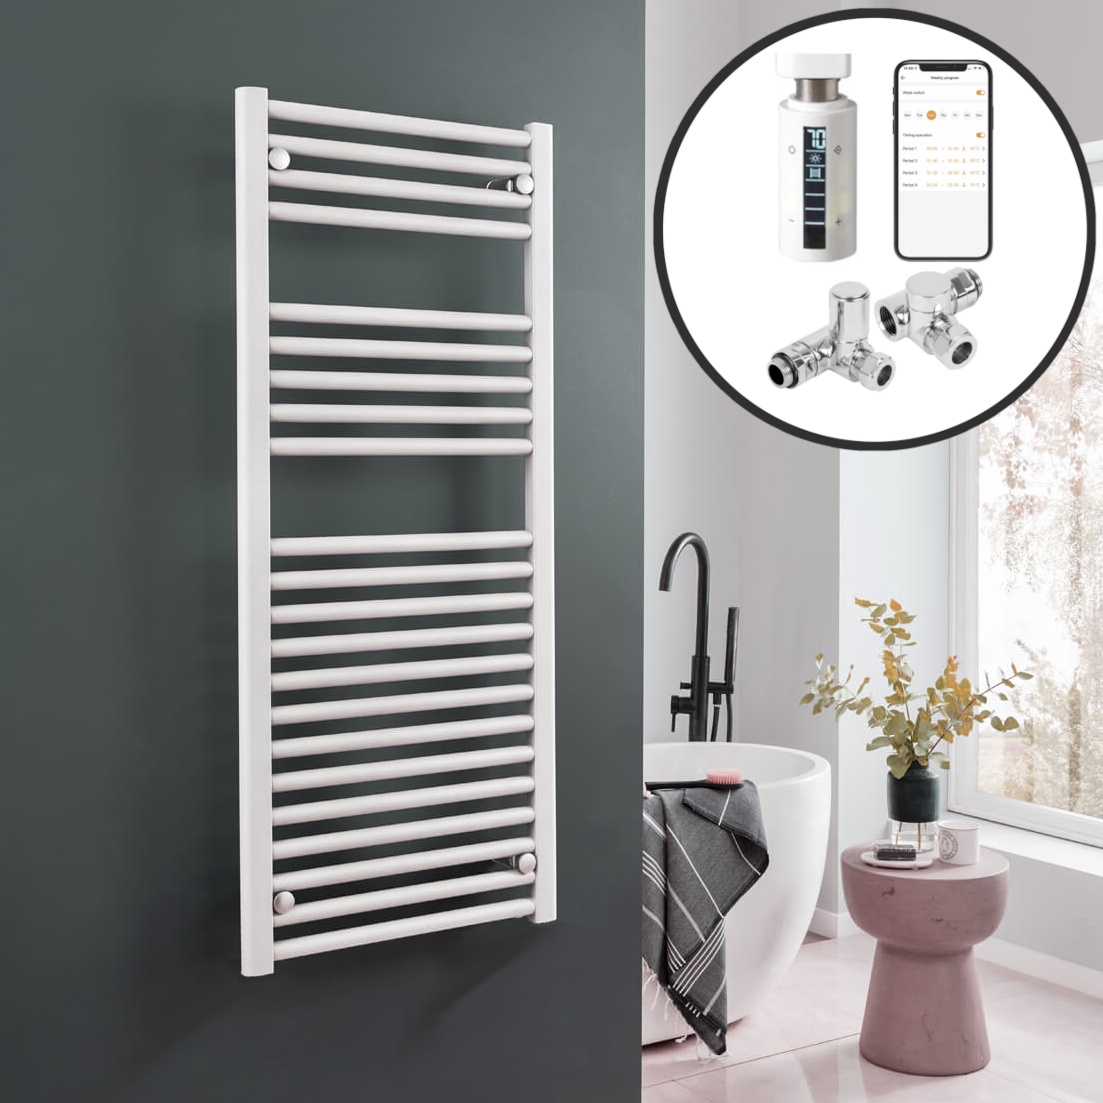 Bray Straight White | Dual Fuel Towel Rail with Thermostat, Timer + WiFi Control Best Quality & Price, Energy Saving / Economic To Run Buy Online From Adax SolAire UK Shop 2